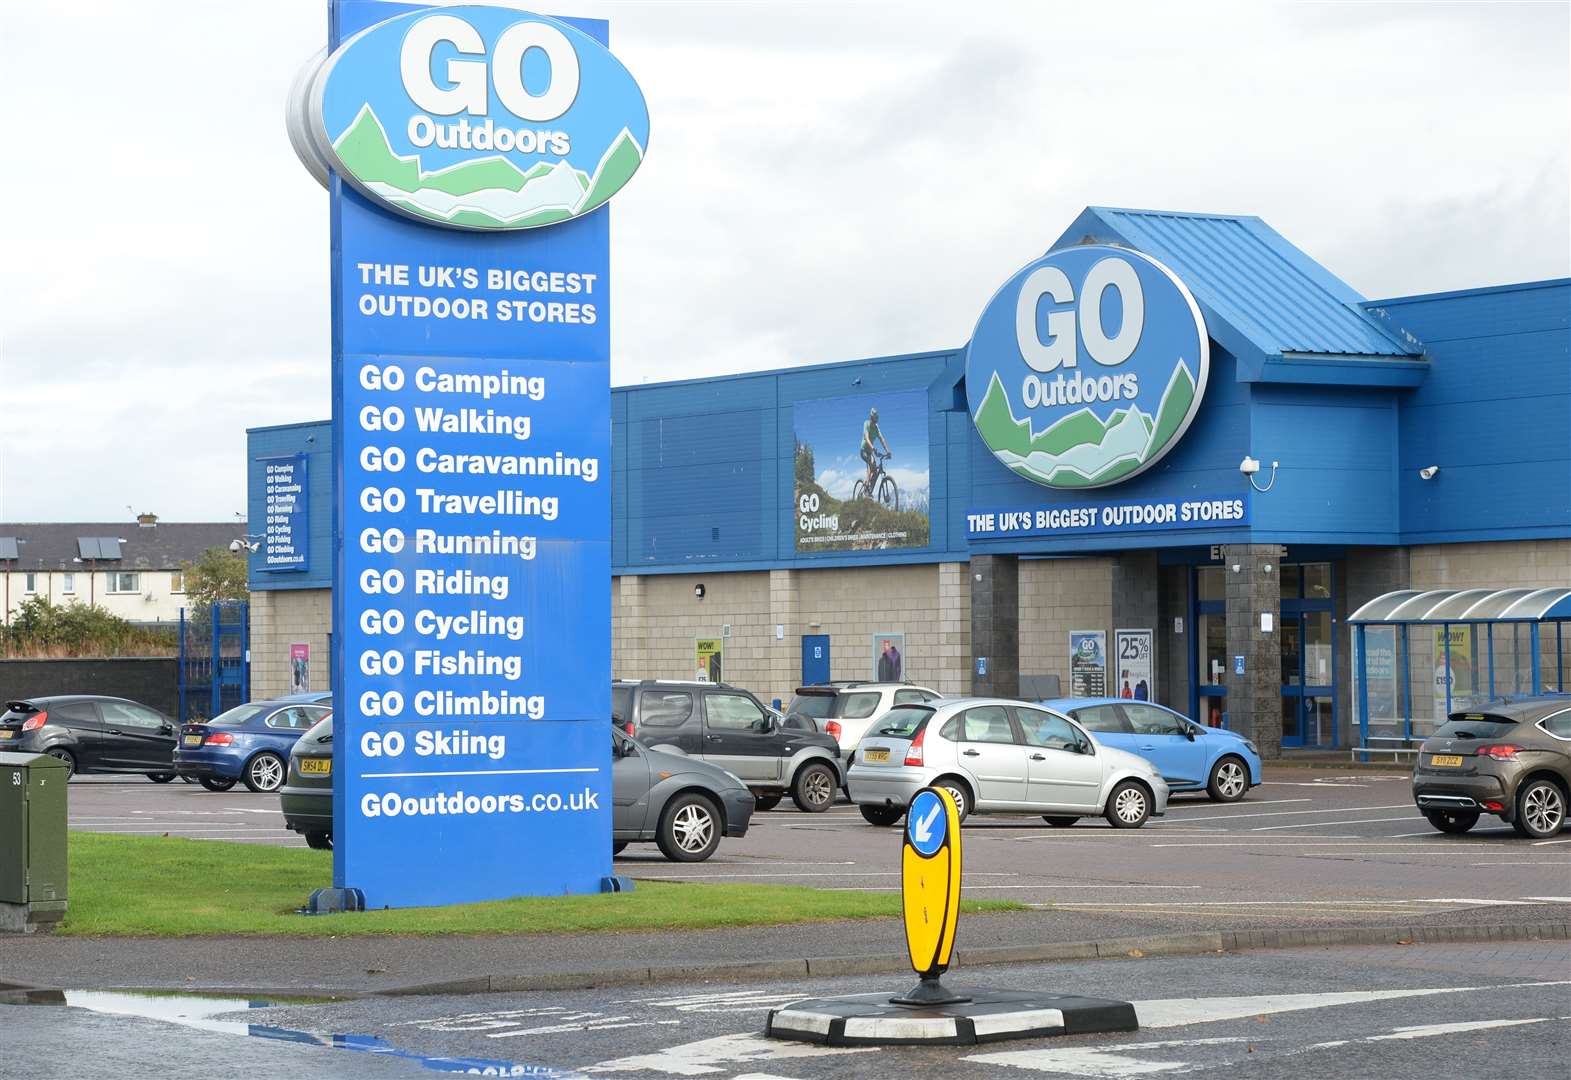 Owners of Go Outdoors, which has a branch in Inverness, say they